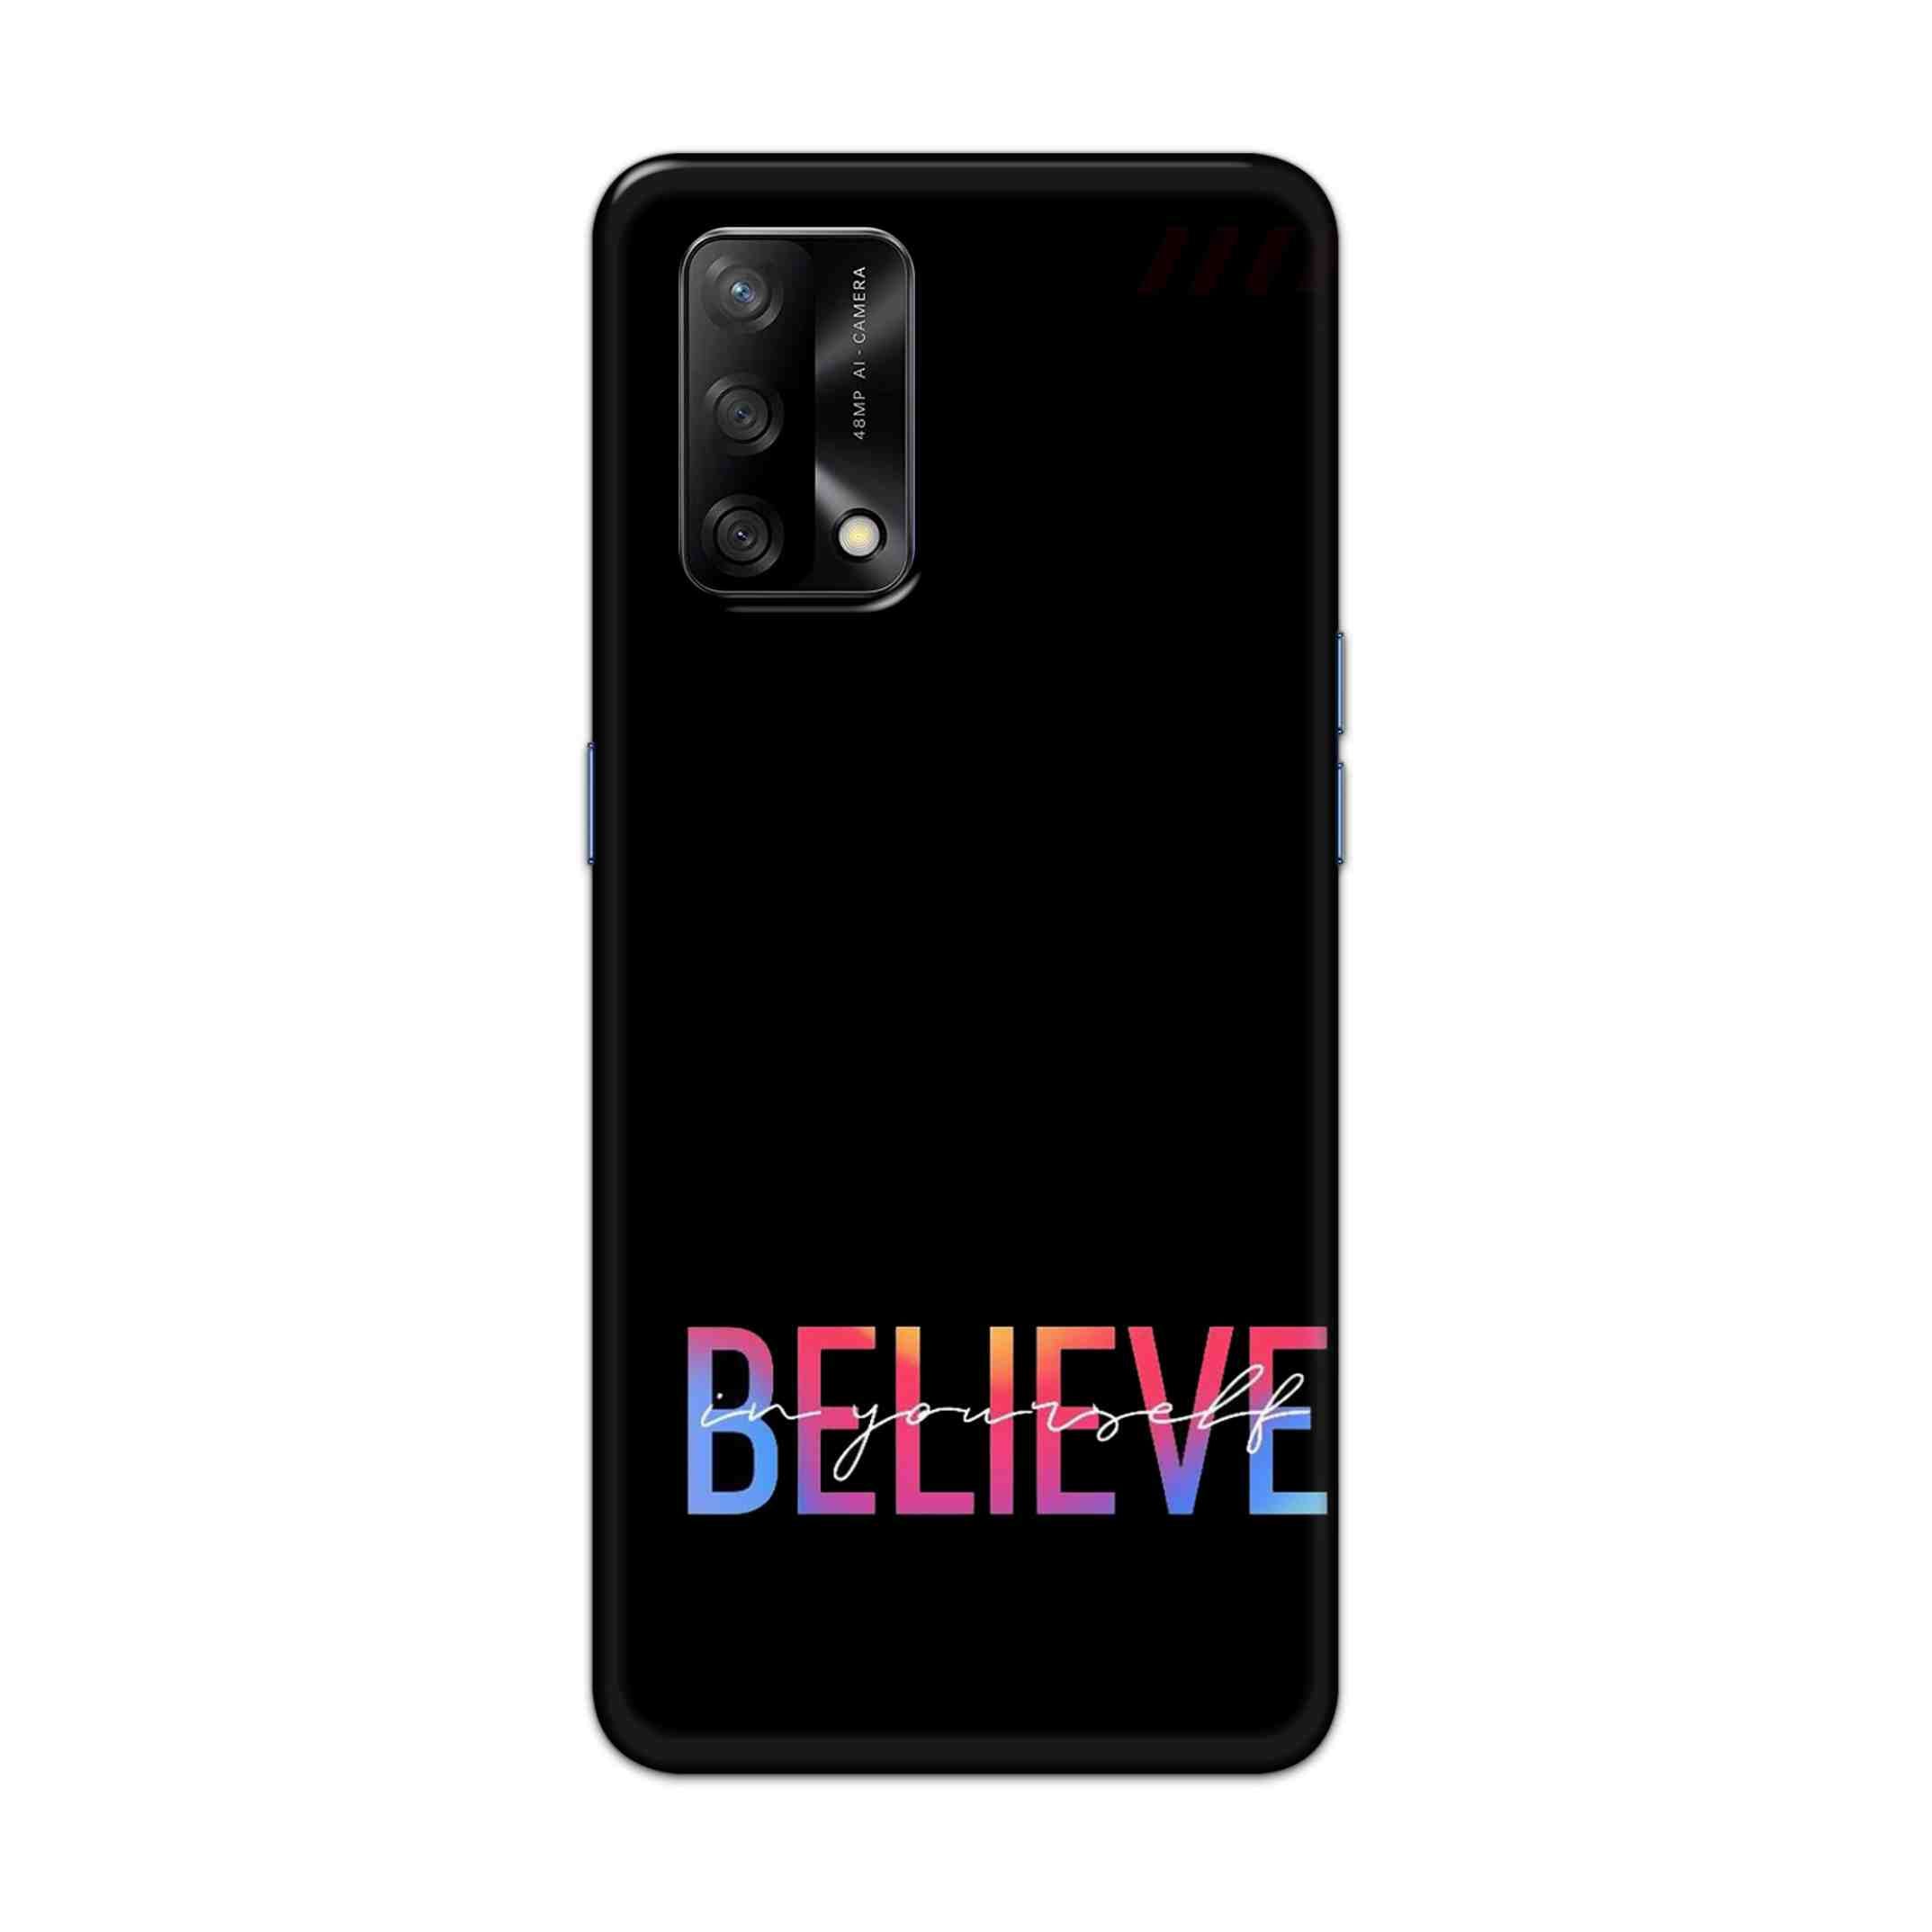 Buy Believe Hard Back Mobile Phone Case Cover For Oppo F19 Online